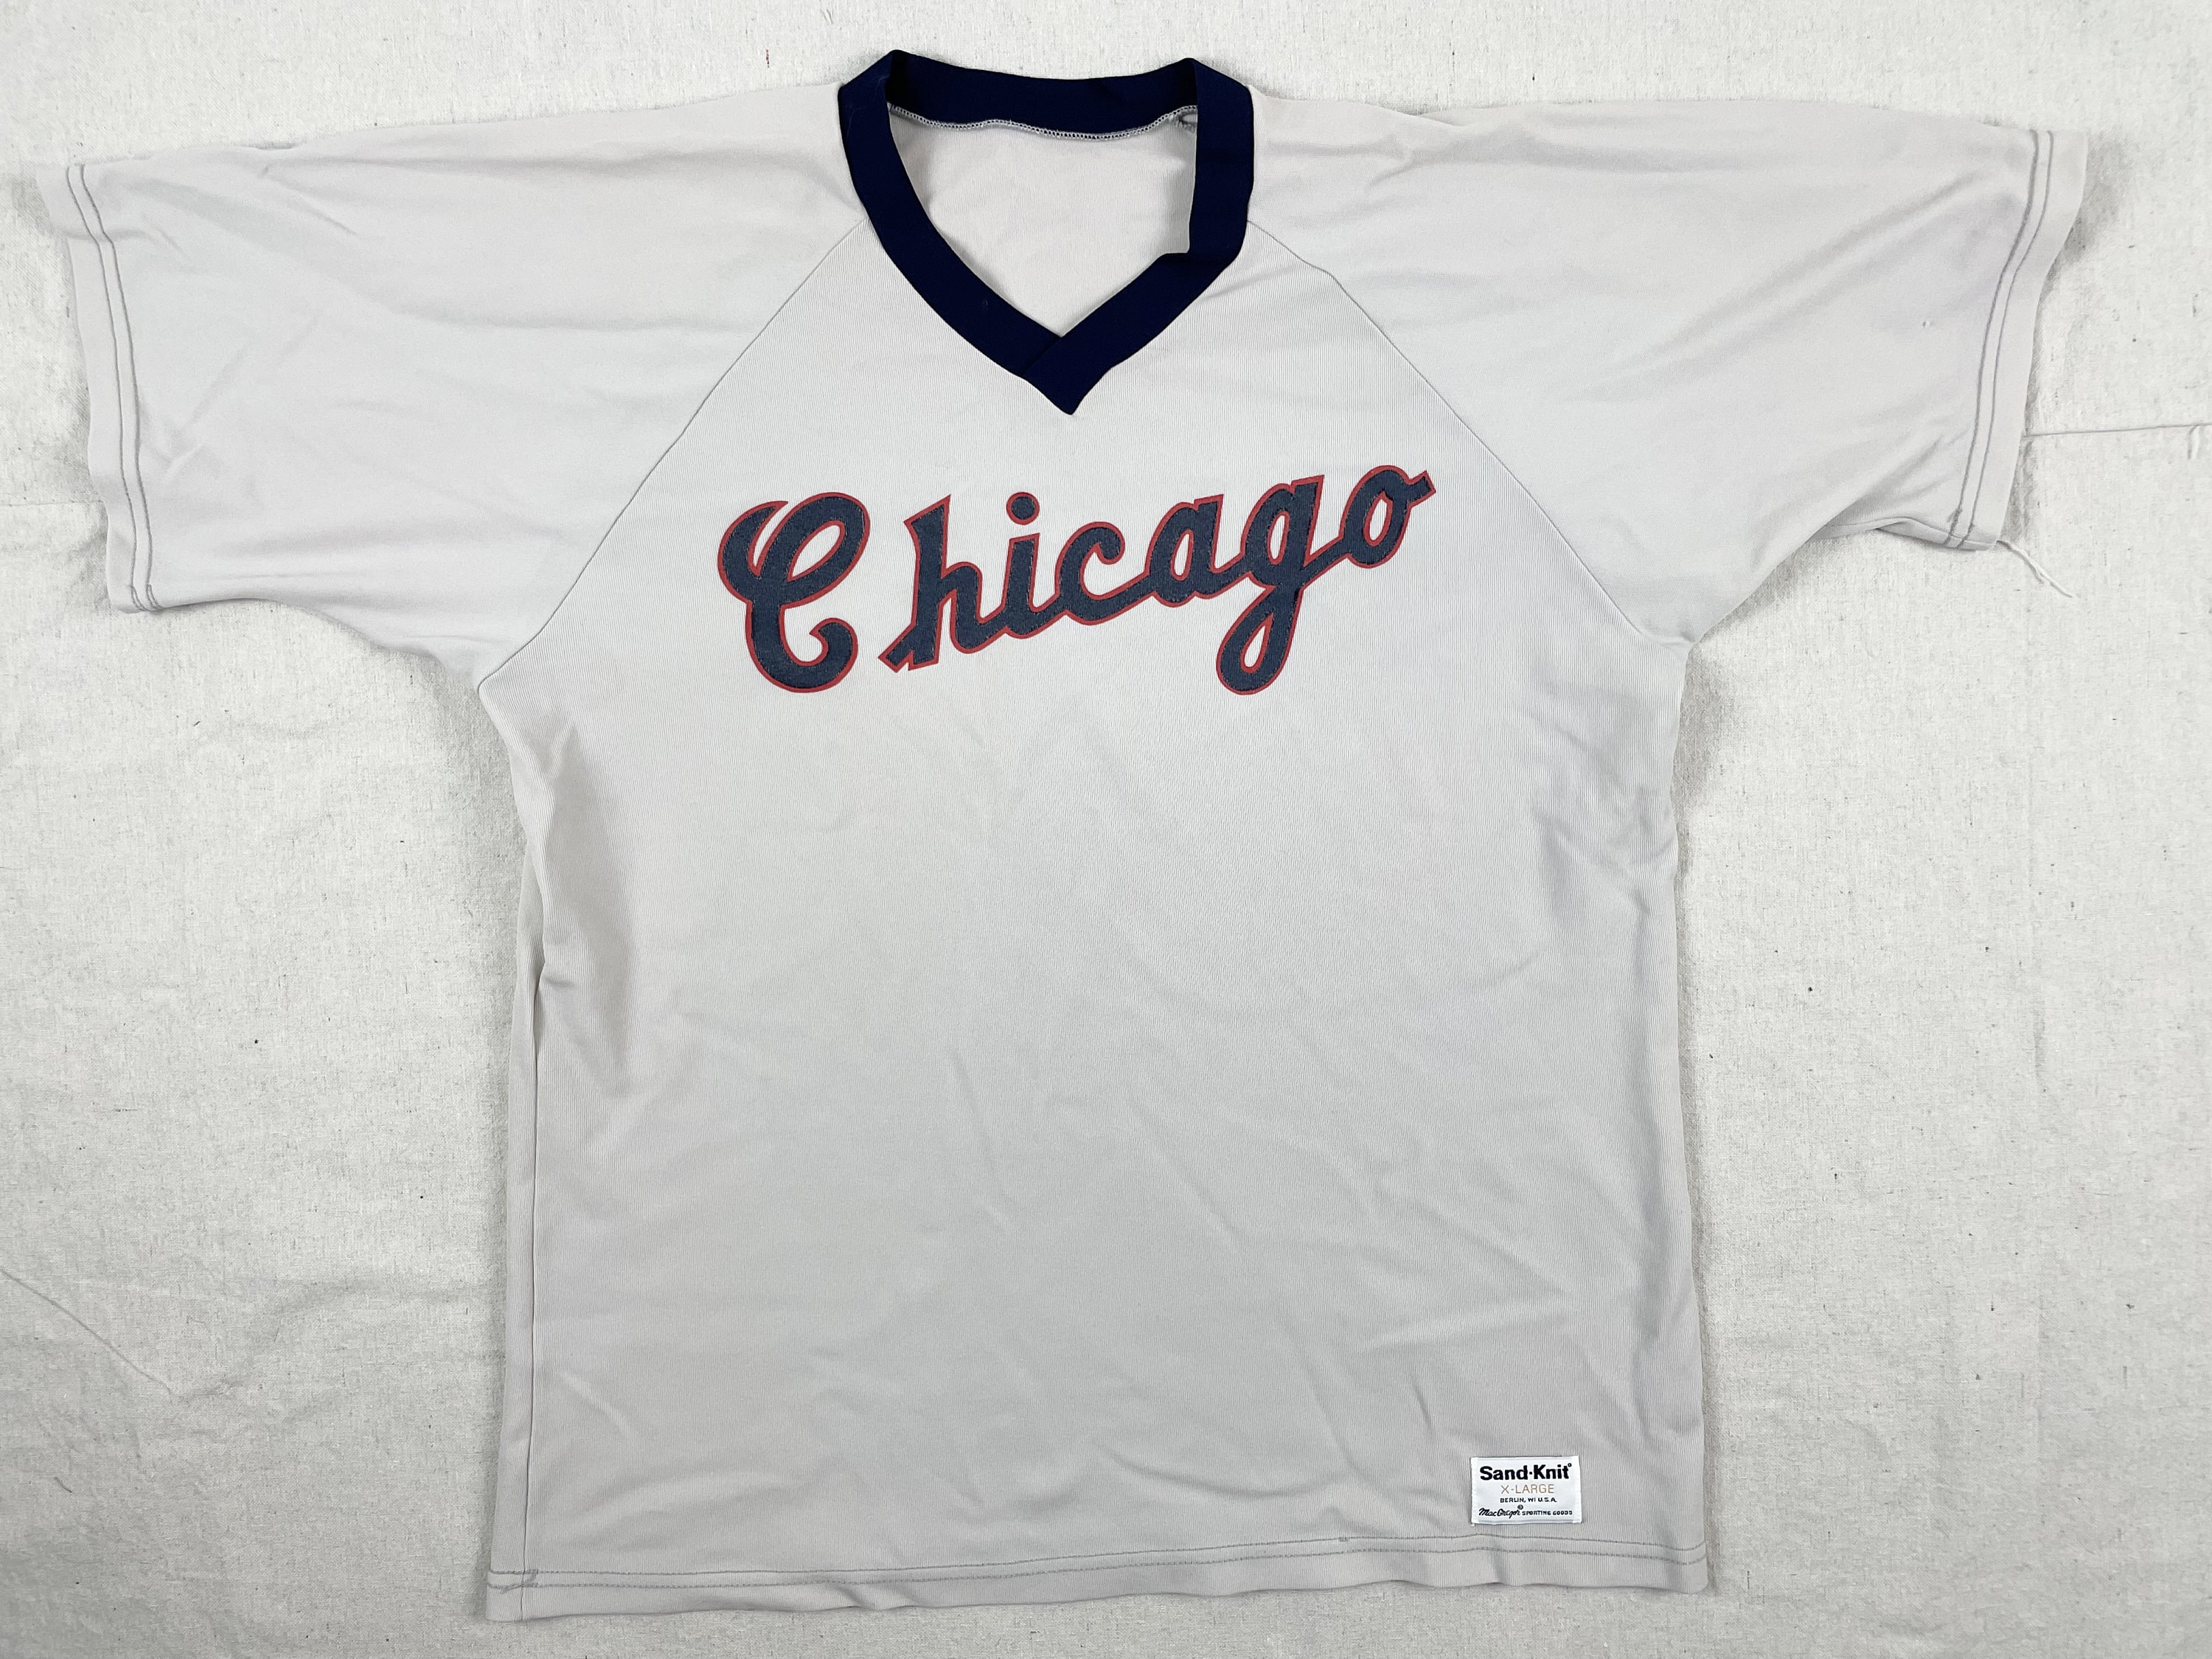 VTG PAUL KONERKO CHICAGO WHITE SOX MAJESTIC JERSEY COOPERSTOWN COLLECTION XL